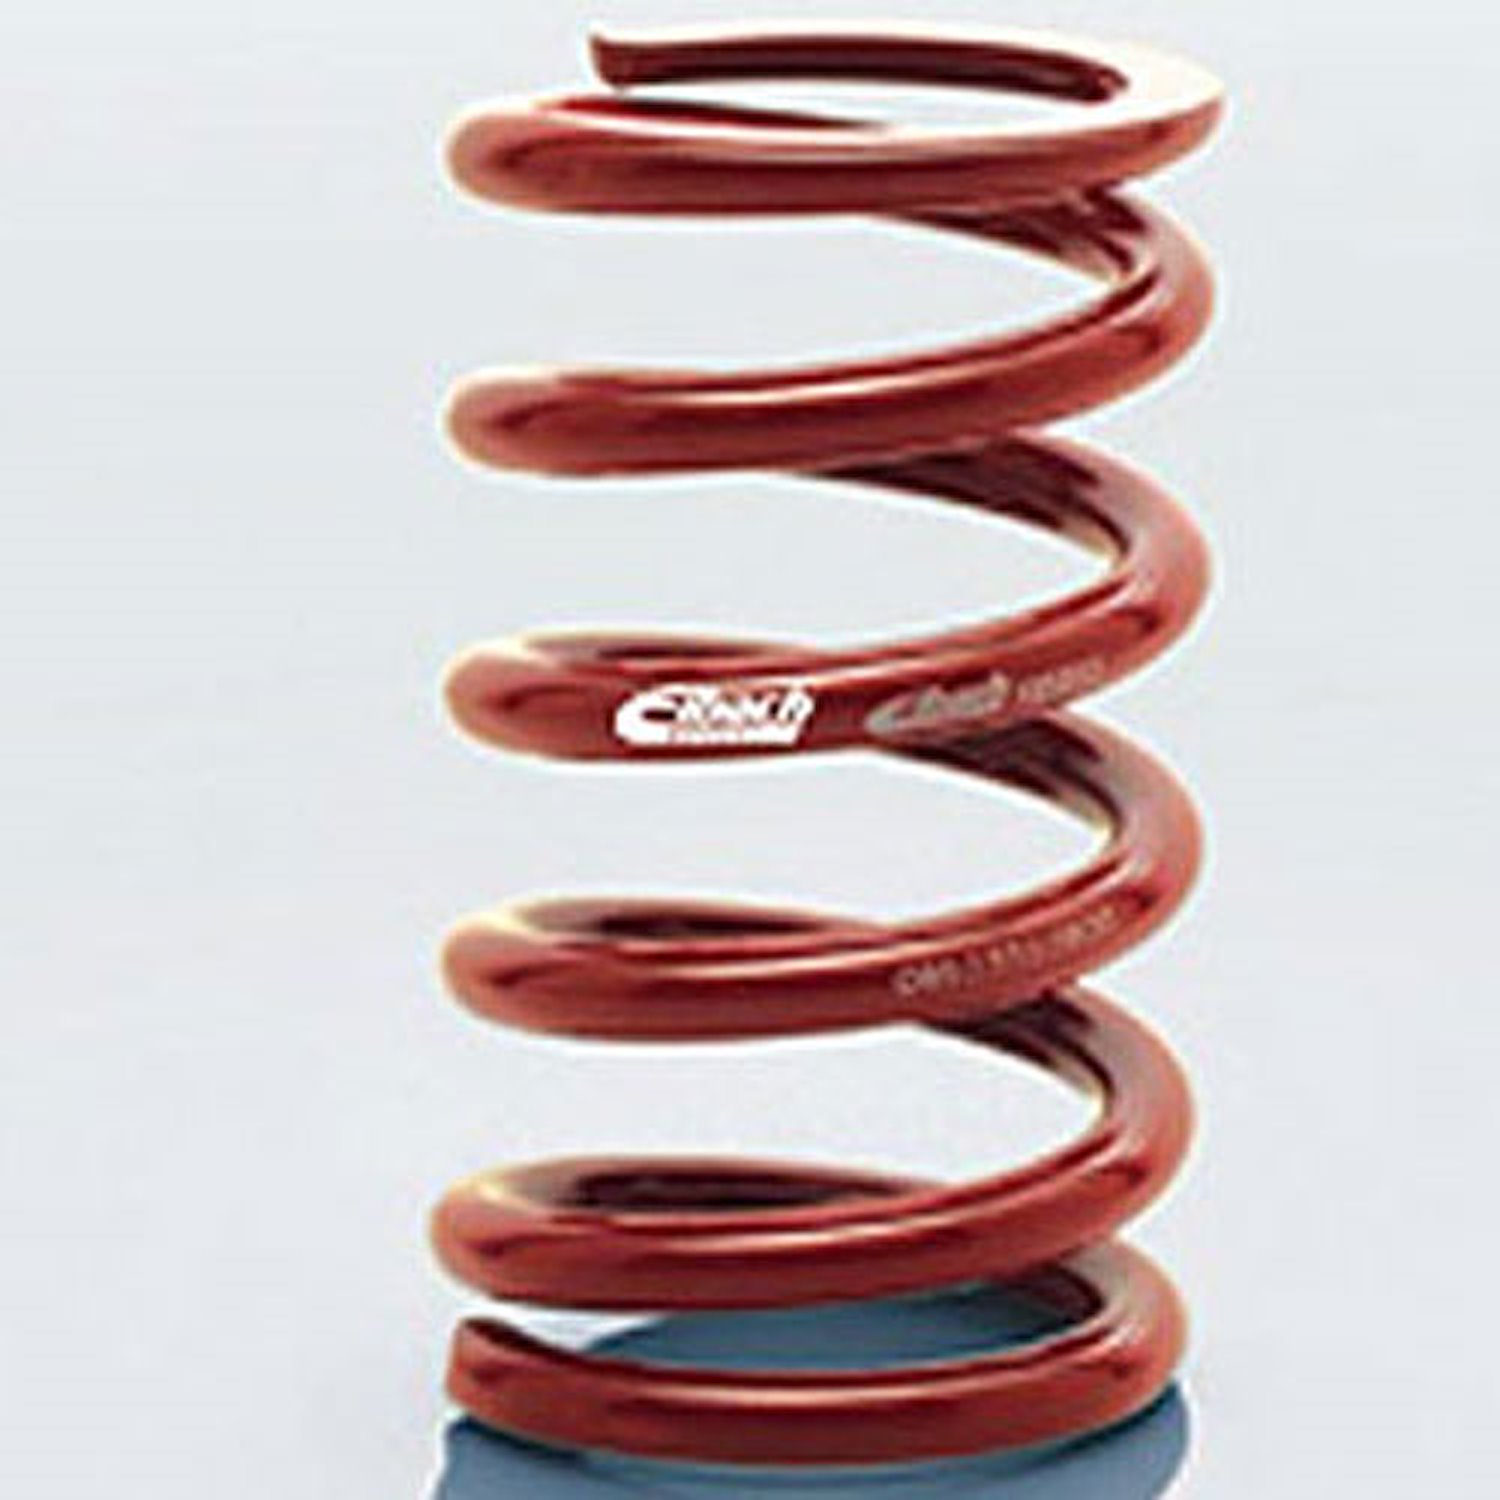 0950.550.1200 EIBACH CONVENTIONAL FRONT SPRING